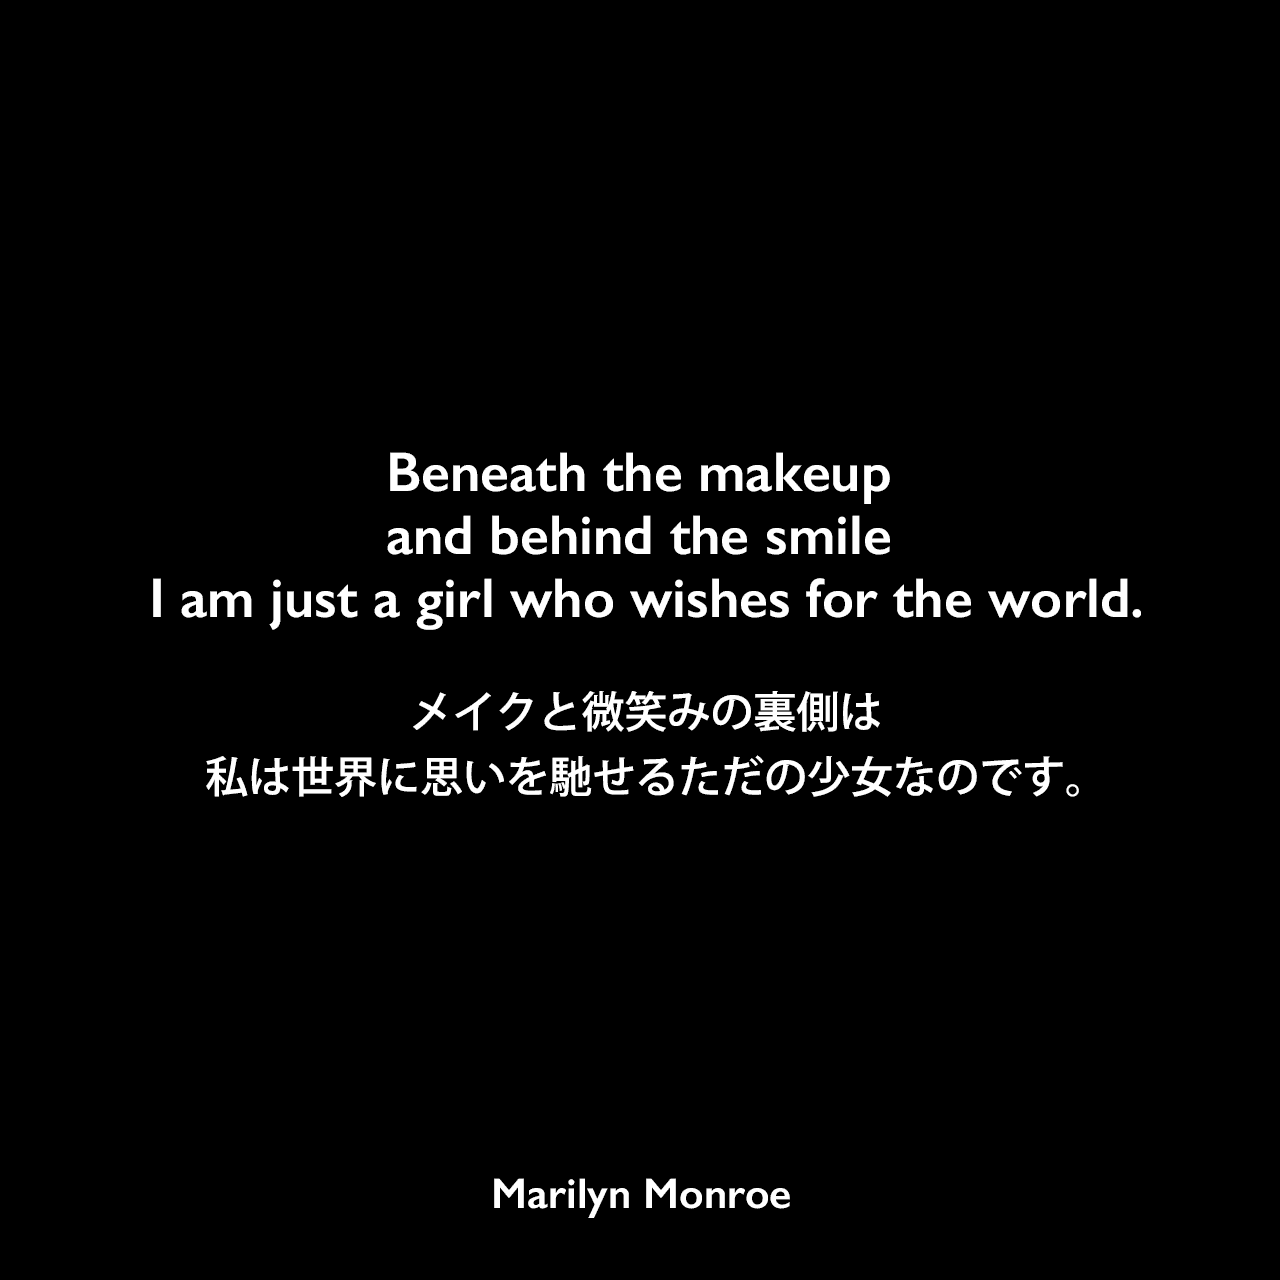 Beneath the makeup and behind the smile I am just a girl who wishes for the world.メイクと微笑みの裏側は、私は世界に思いを馳せるただの少女なのです。Marilyn Monroe